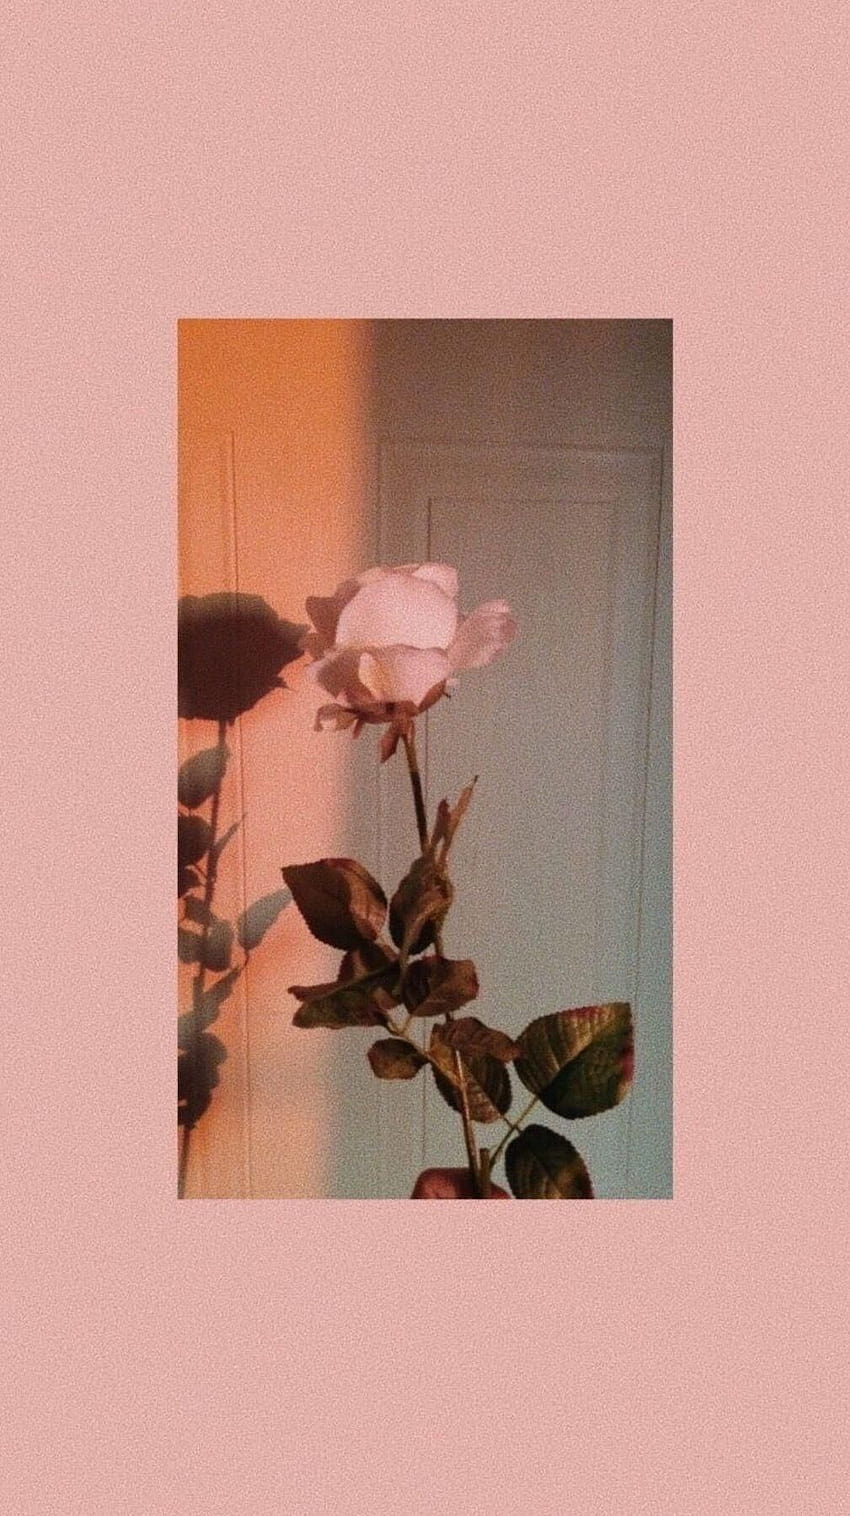 Aesthetic background of a pink rose in a vase - Rose gold